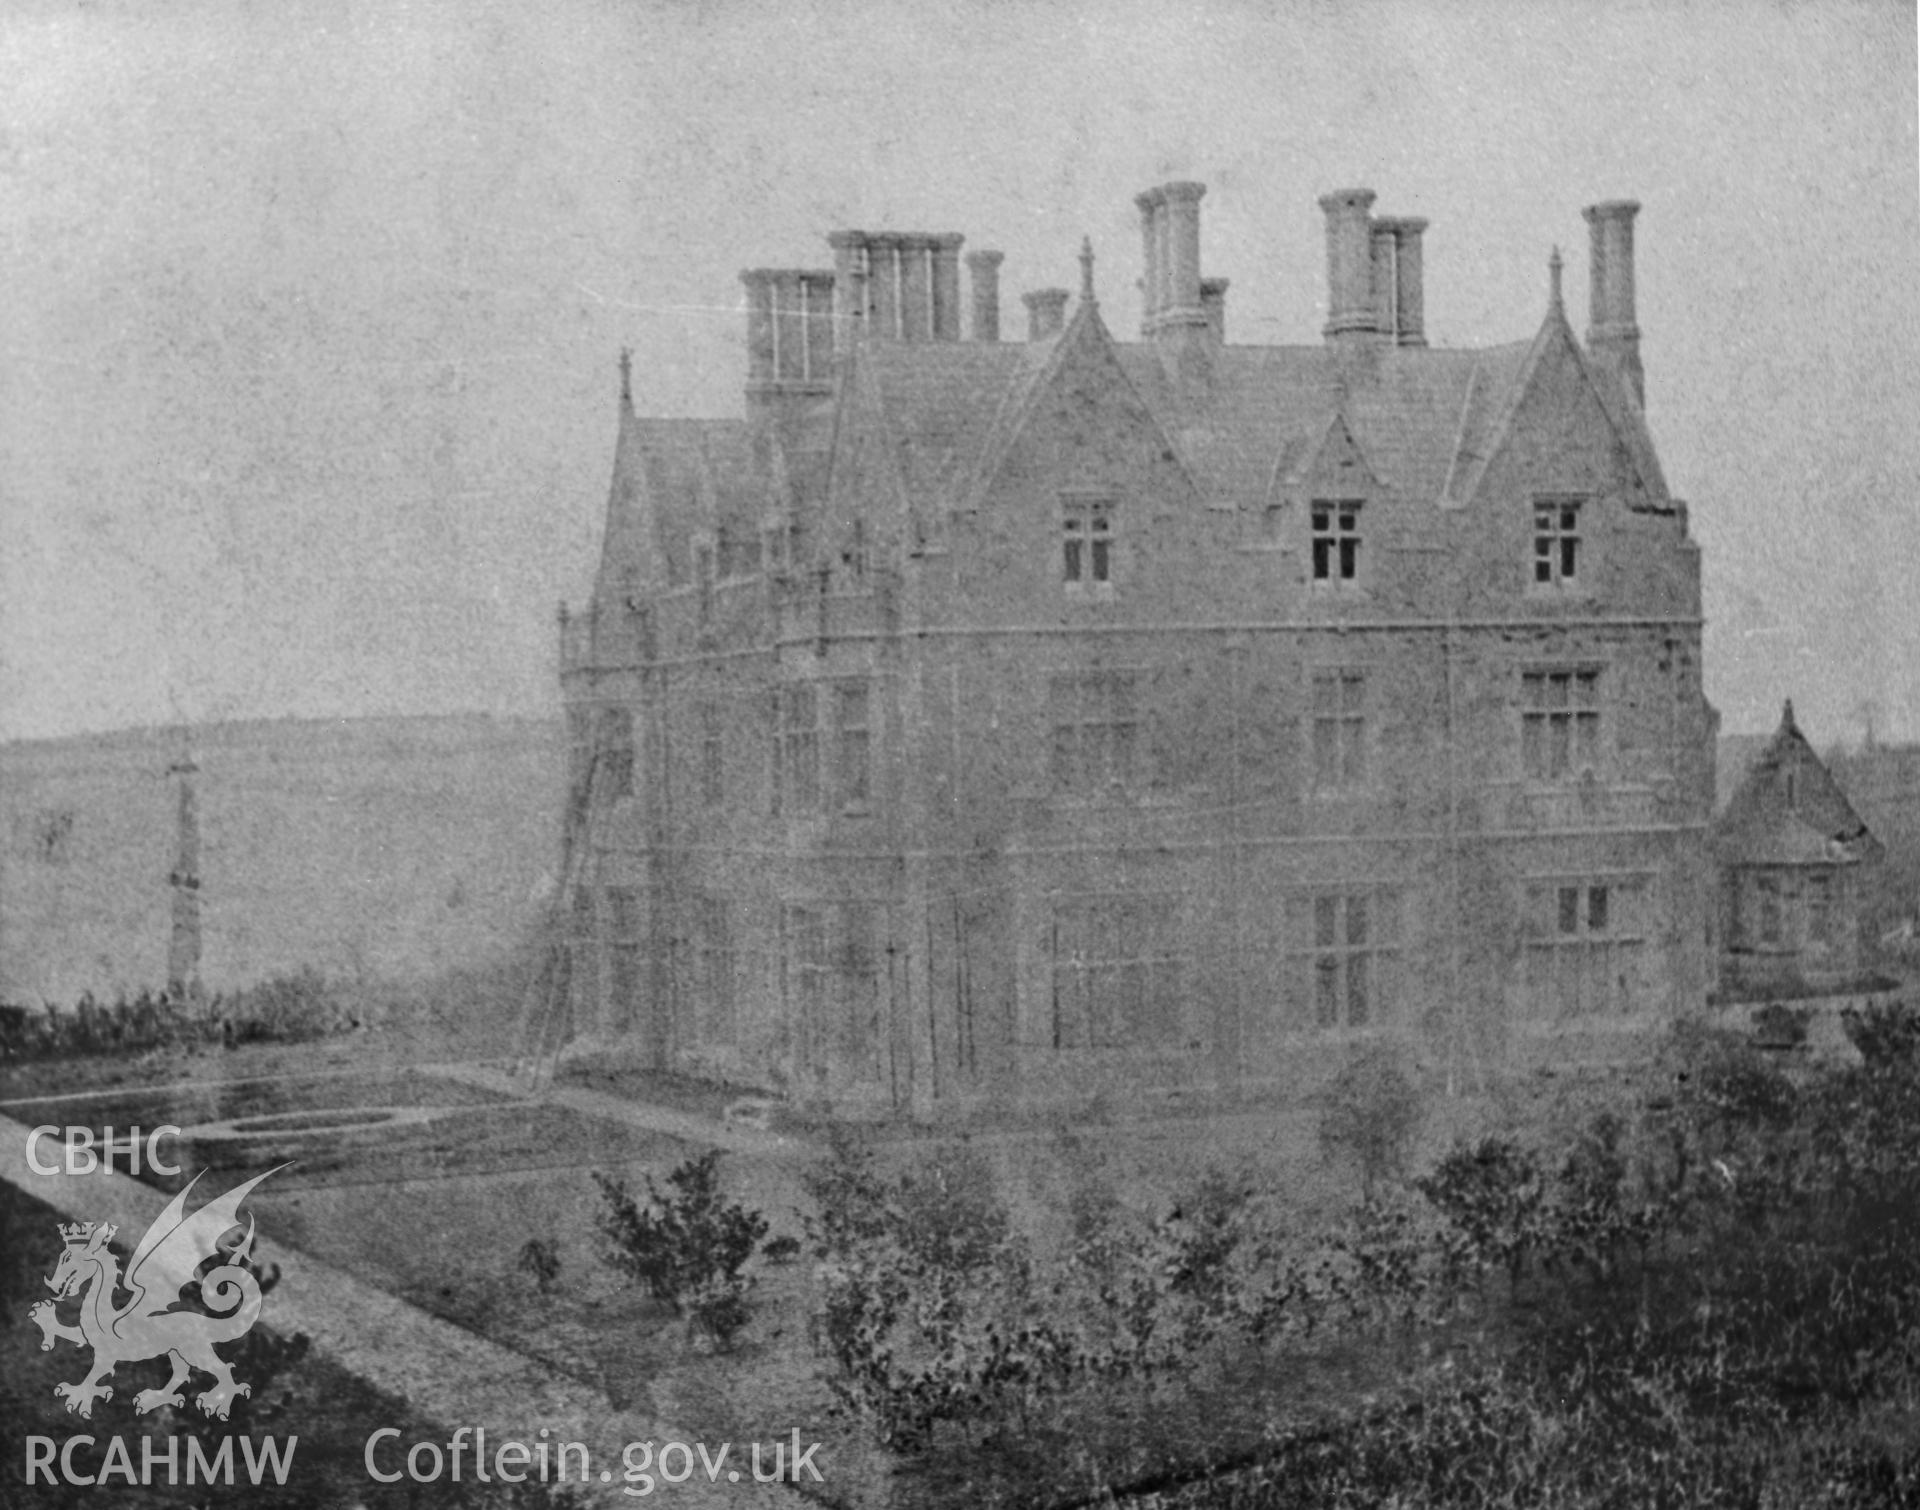 Copy of an early photograph dated c.1855, taken by Mary Dillwyn, showing Hendrefoilan House, Swansea under construction.